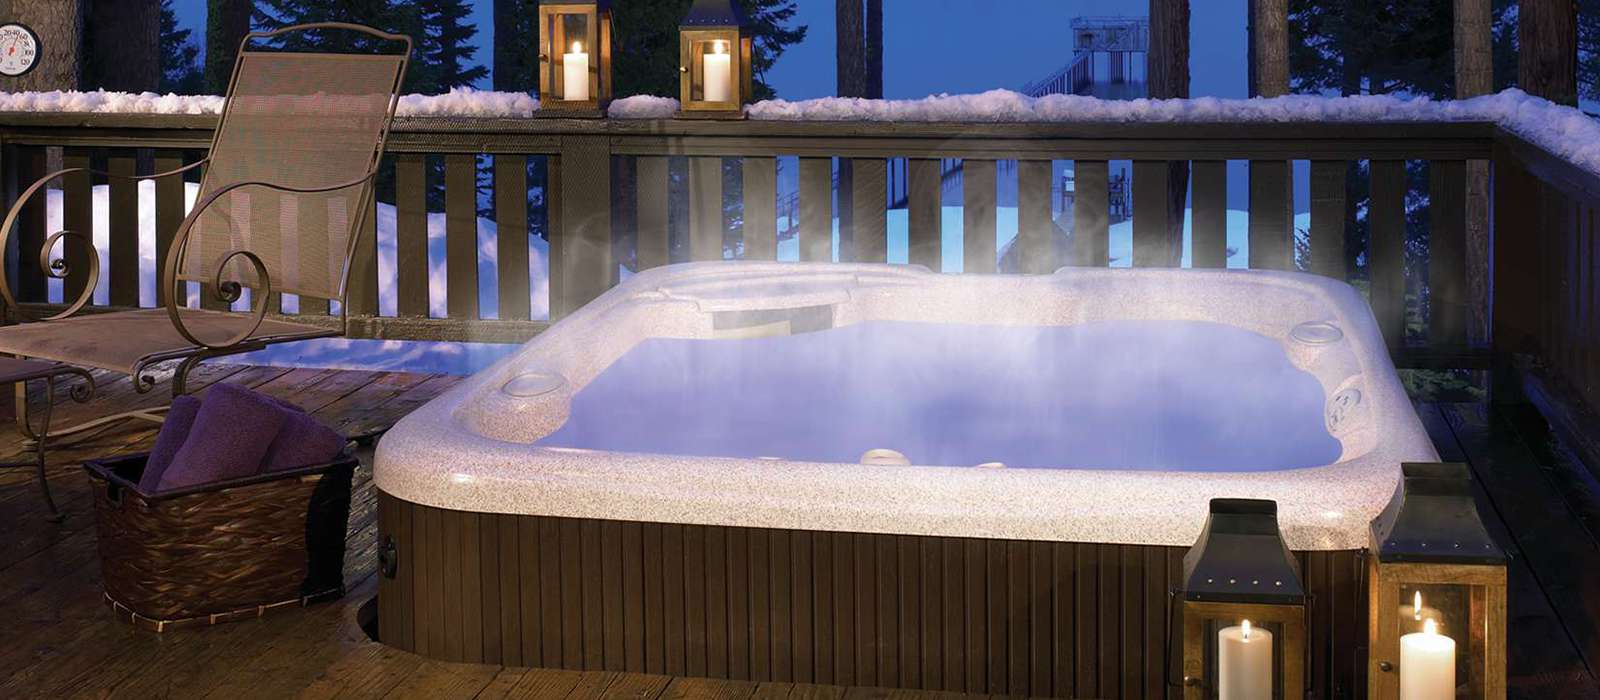 The Prodigy 5 person hot tub features the patented Soothing Stream® and JetStream® jets for an invigorating lower back massage. With personalized hydromassage options and the Luminescence® LED lighting system, this spa provides the perfect space to totally relax.